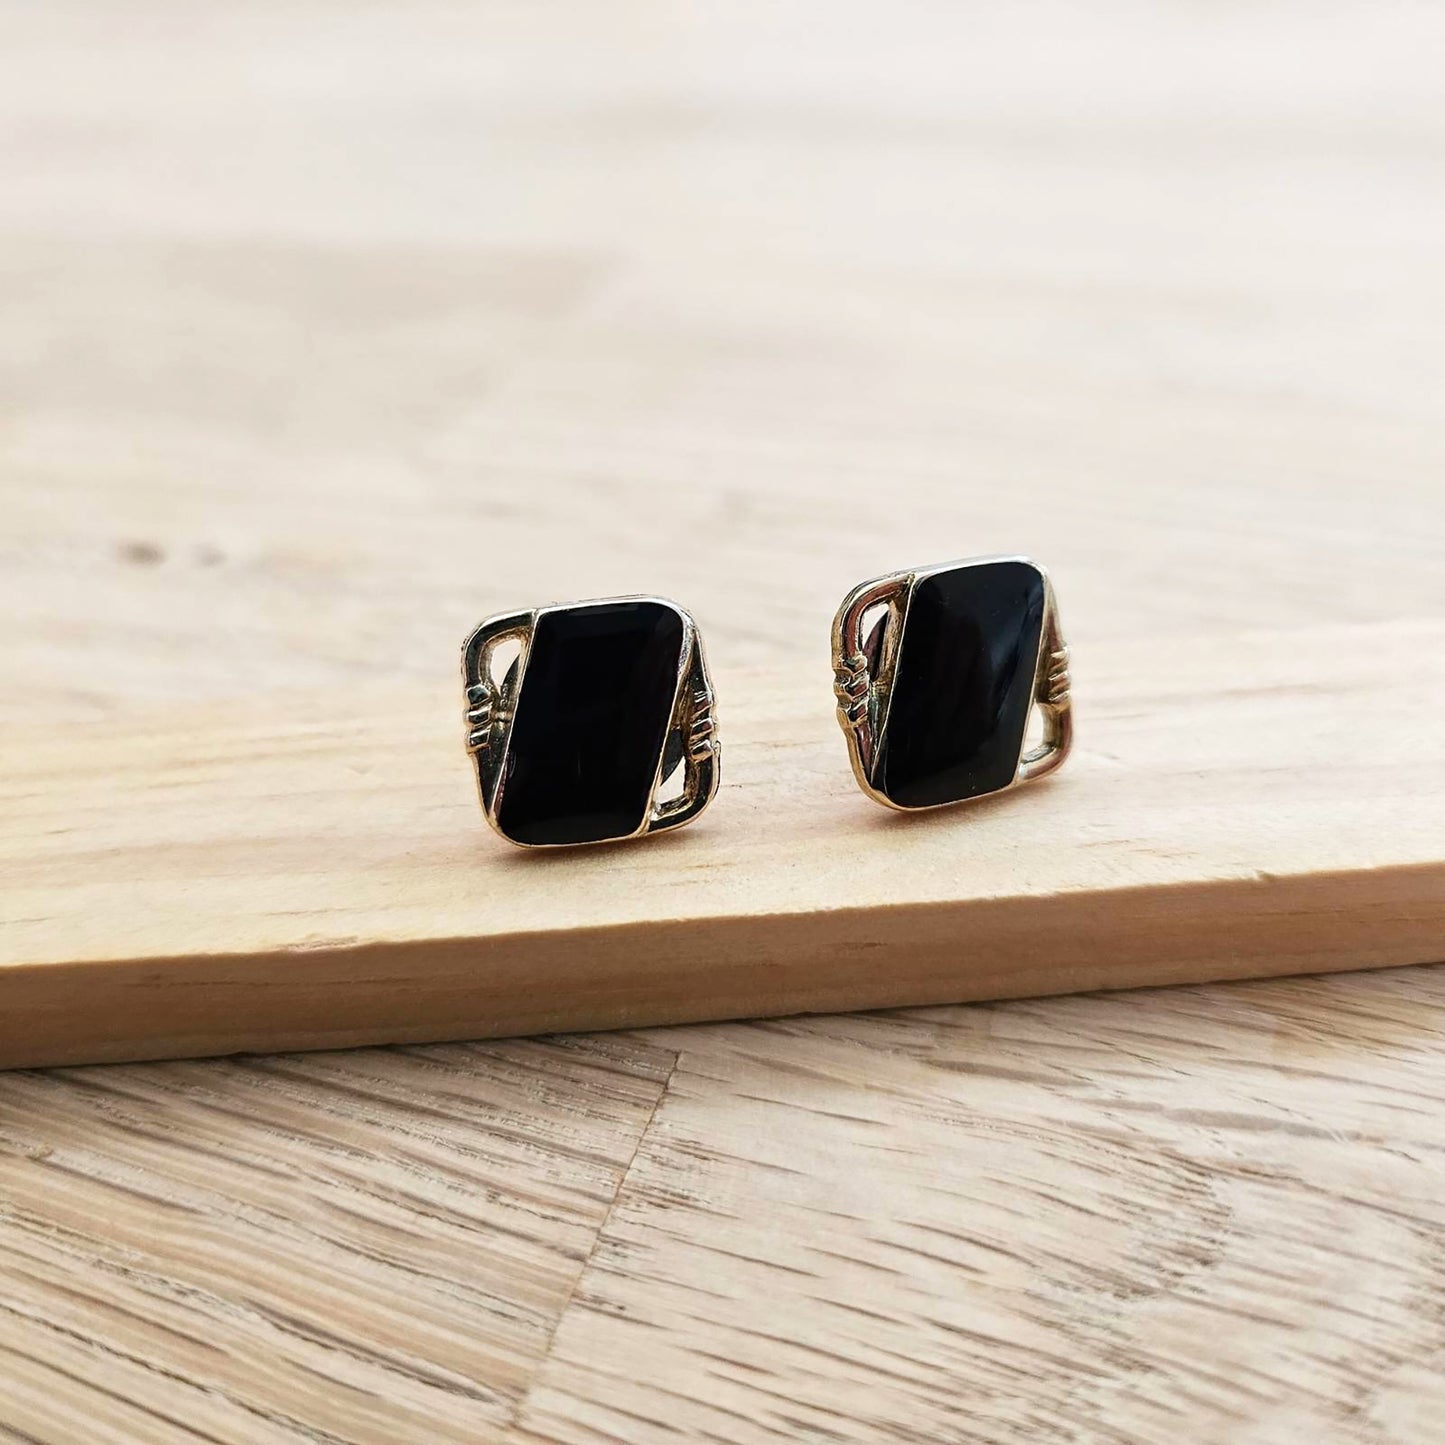 "Rectangle stud earrings. - Elevate your style with these timeless black rectangular stud earrings."